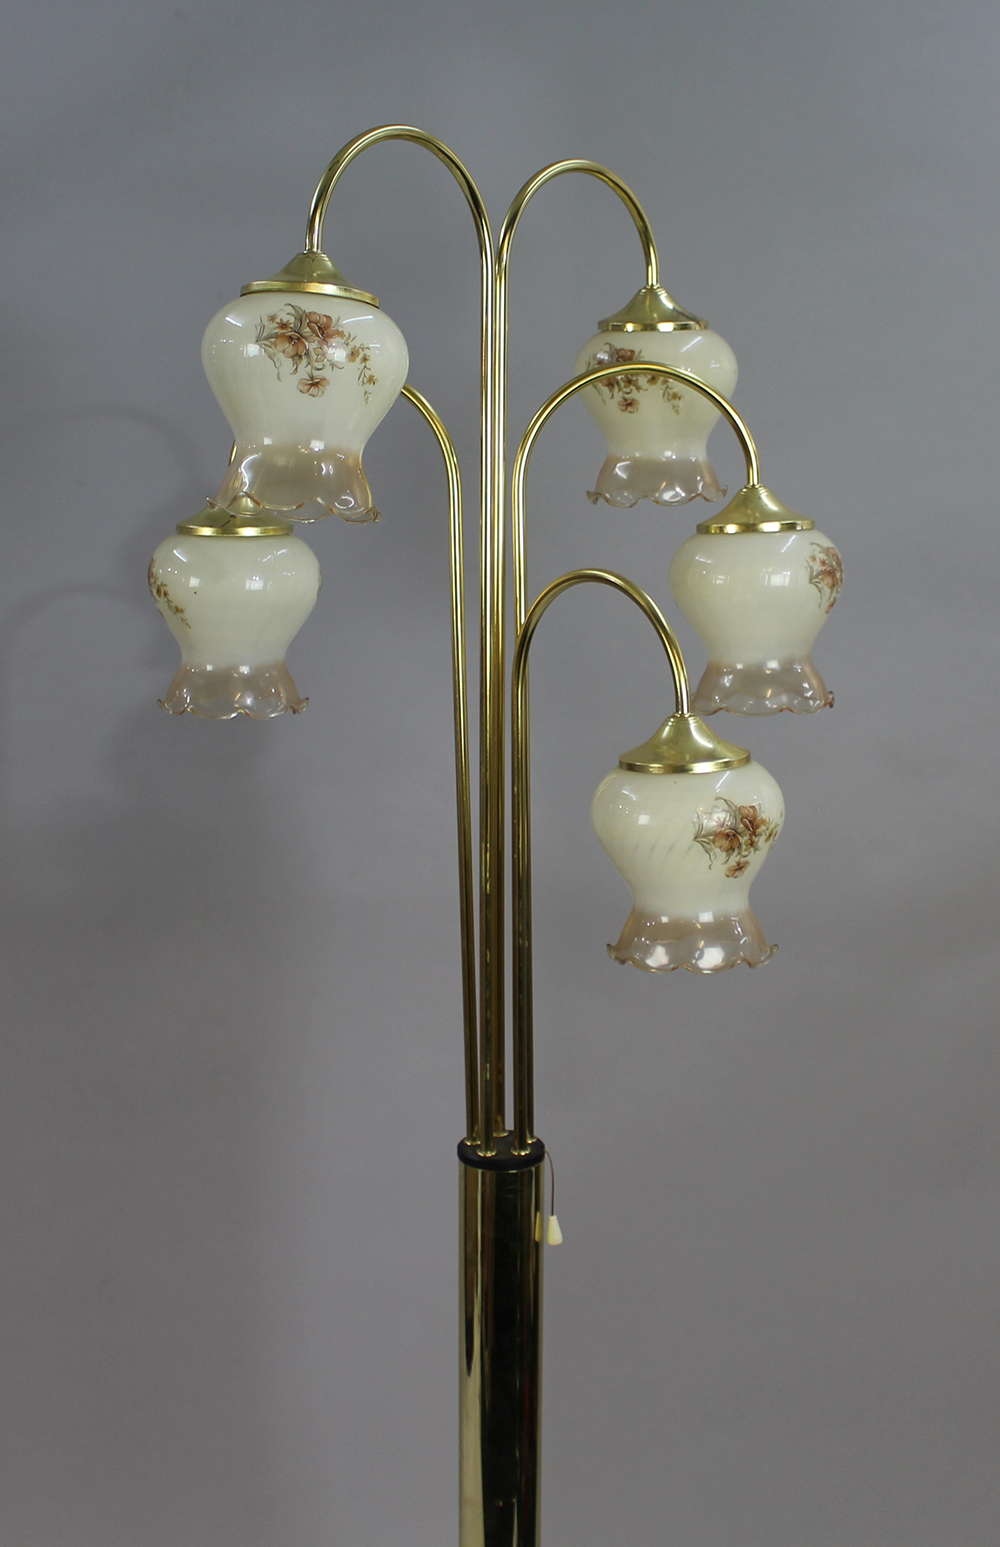 Brass Standard Lamp With Vintage Glass Shades - Image 2 of 4